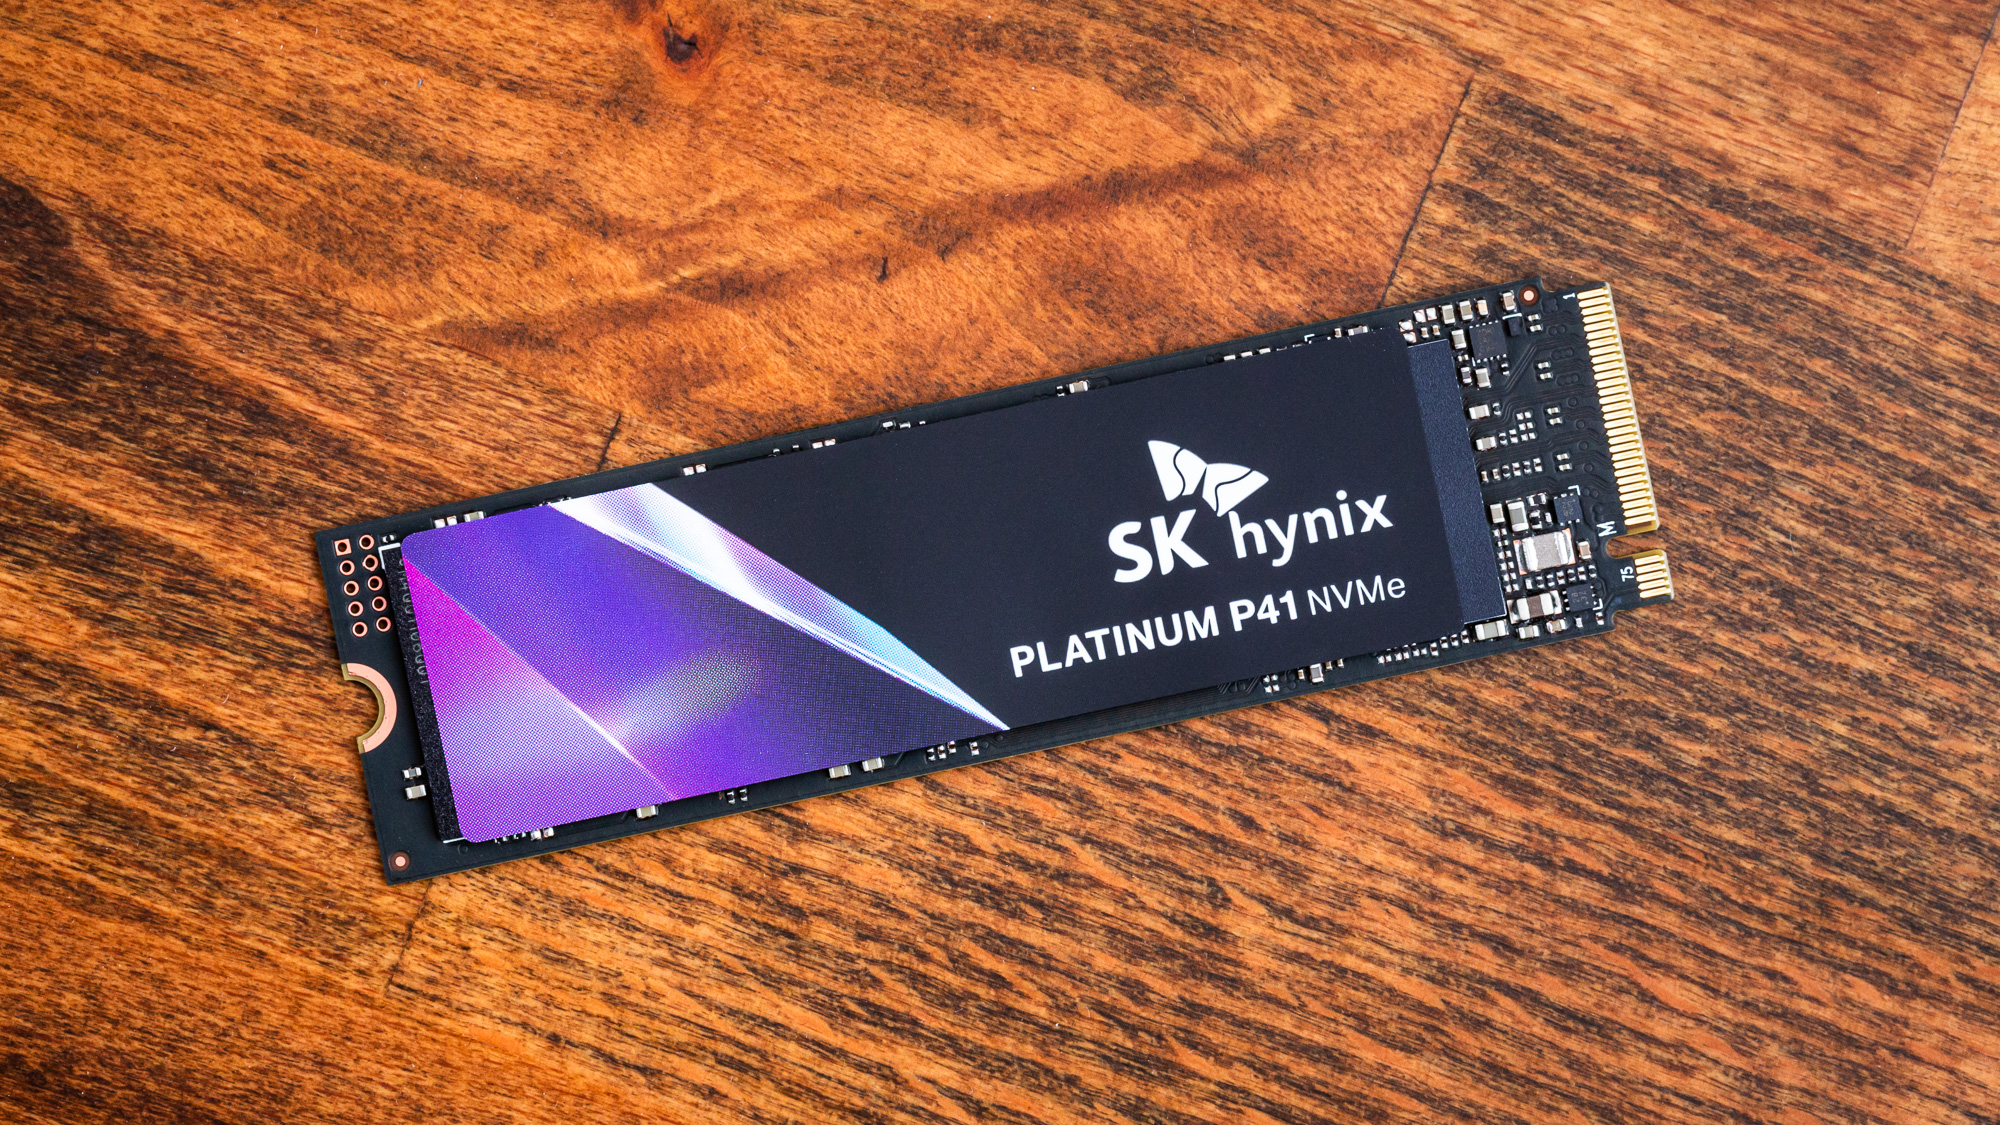 SK hynix Platinum P41 SSD Review: The Best Around (Updated)